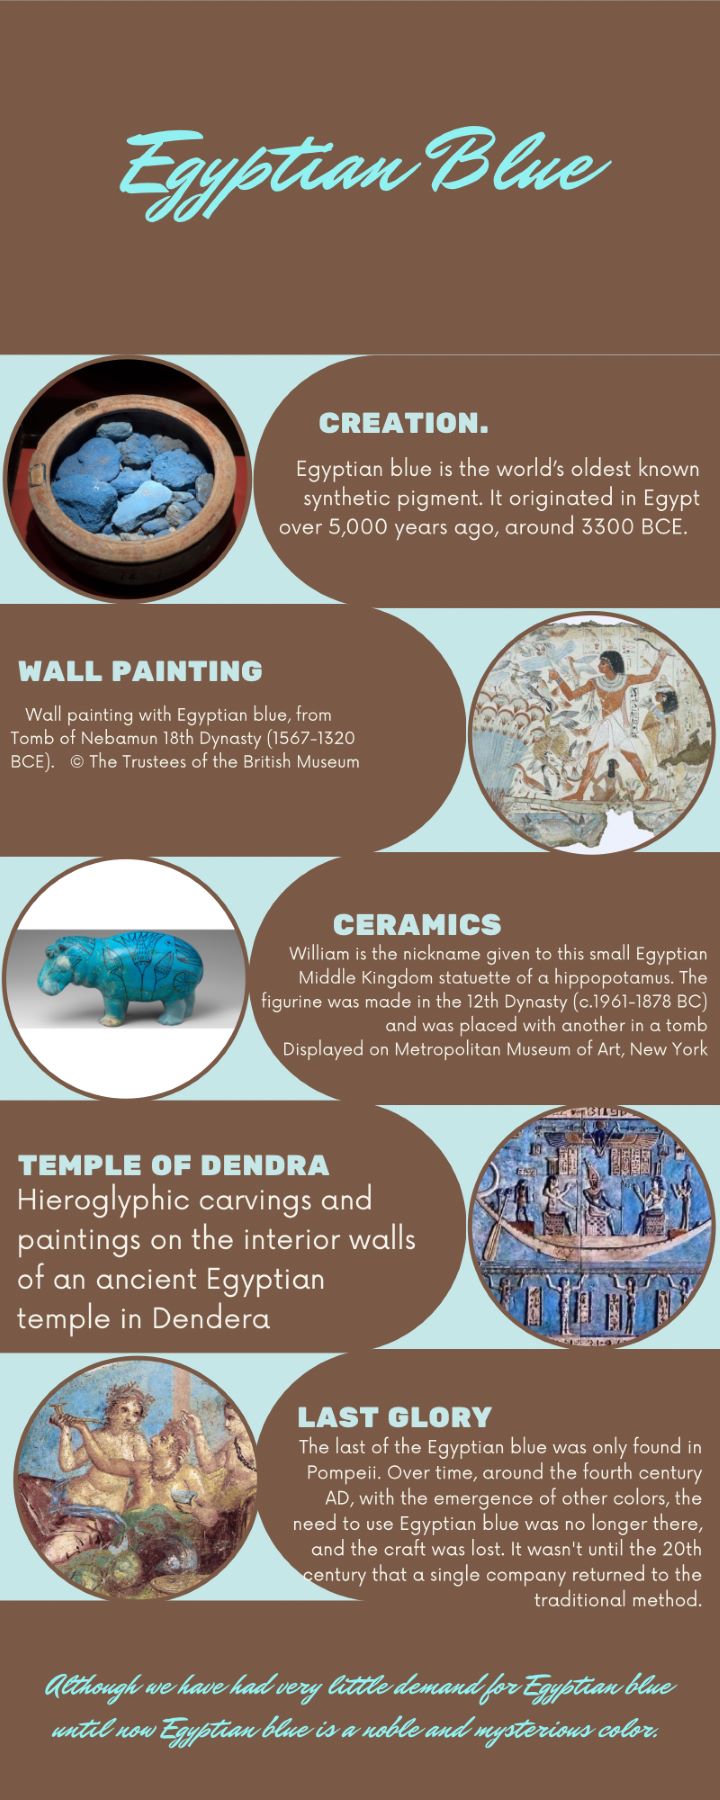 An infographic stating: "Egyptian Blue "Creation. Egyptian blue is the world's oldest known synthetic pigment. It originated in Egypt over 5,000 years ago, around 3300 BCE." [There is a photo of blue stones in a wooden bowl to the left.] "Wall painting. Wall painting in Egyptian blue, from Tomb of Nebamun 18th Dynasty (1567-1320 BCE). Copyright The Trustees of the British Museum." [There is a photo of the aforementioned artwork to the right] "Ceramics. William is the nickname given to this small Egyptian Middle Kingdom statuette of a hippopotamus. The figurine was made in the 12th Dynasty (circa 1961-1878 BC) and was placed with another in a tomb. Displayed in the Metropolitan Museum of Art, New York.: [There is a photo of the aforementioned hippopotamus to the left.] "Temple of Dendra. Hieroglyphic carvings and paintings on the interior walls of an ancient Egyptian temple in Dendera." [There is a photo of the aforementioned work to the right.] "Last Glory. The last of the Egyptian blue was only found in Pompeii. Over time, around the fourth century AD, with the emergence of other colors, the need to use Egyptian blue was no longer there, and the craft was lost. It wasn't until the 20th century that a single company returned to the traditional method." [There is a painting of three people to the right.] "Although we have had very little demand for Egyptian blue until now Egyptian blue is a noble and mysterious color."